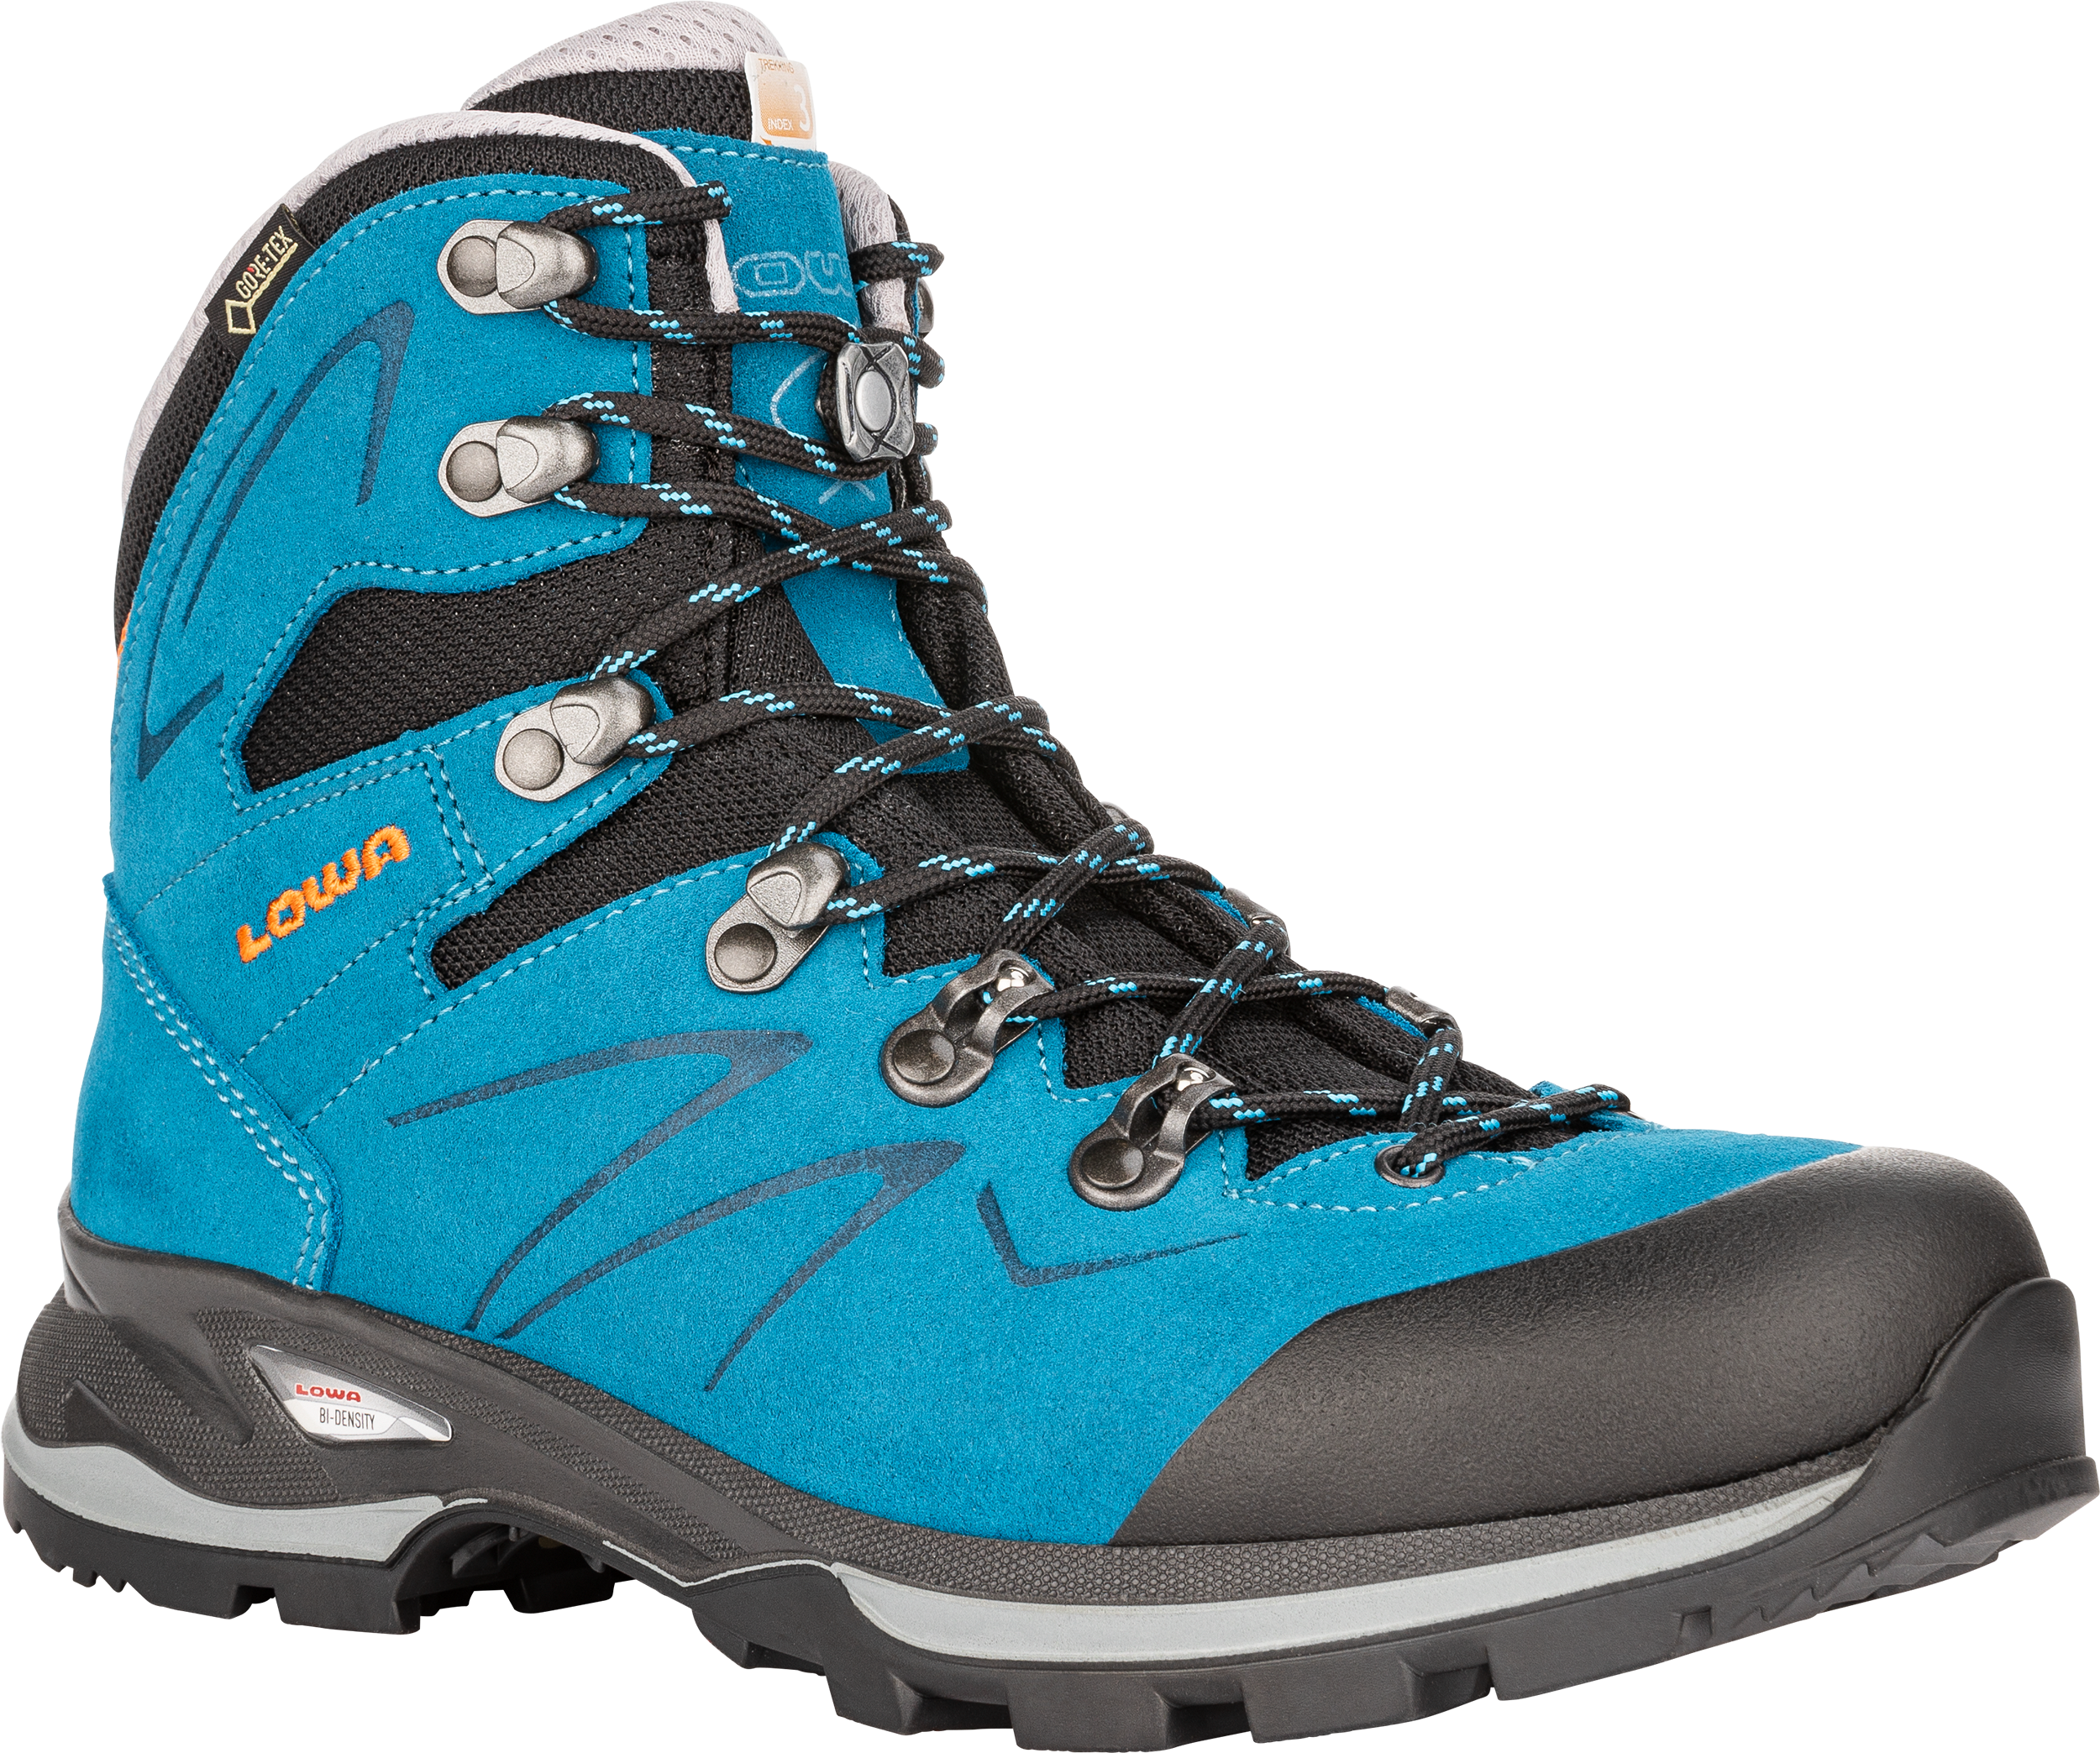 Uitgang Afrikaanse Halloween BADIA GTX Ws: TREKKING shoes for women: Quality and comfort | LOWA LT